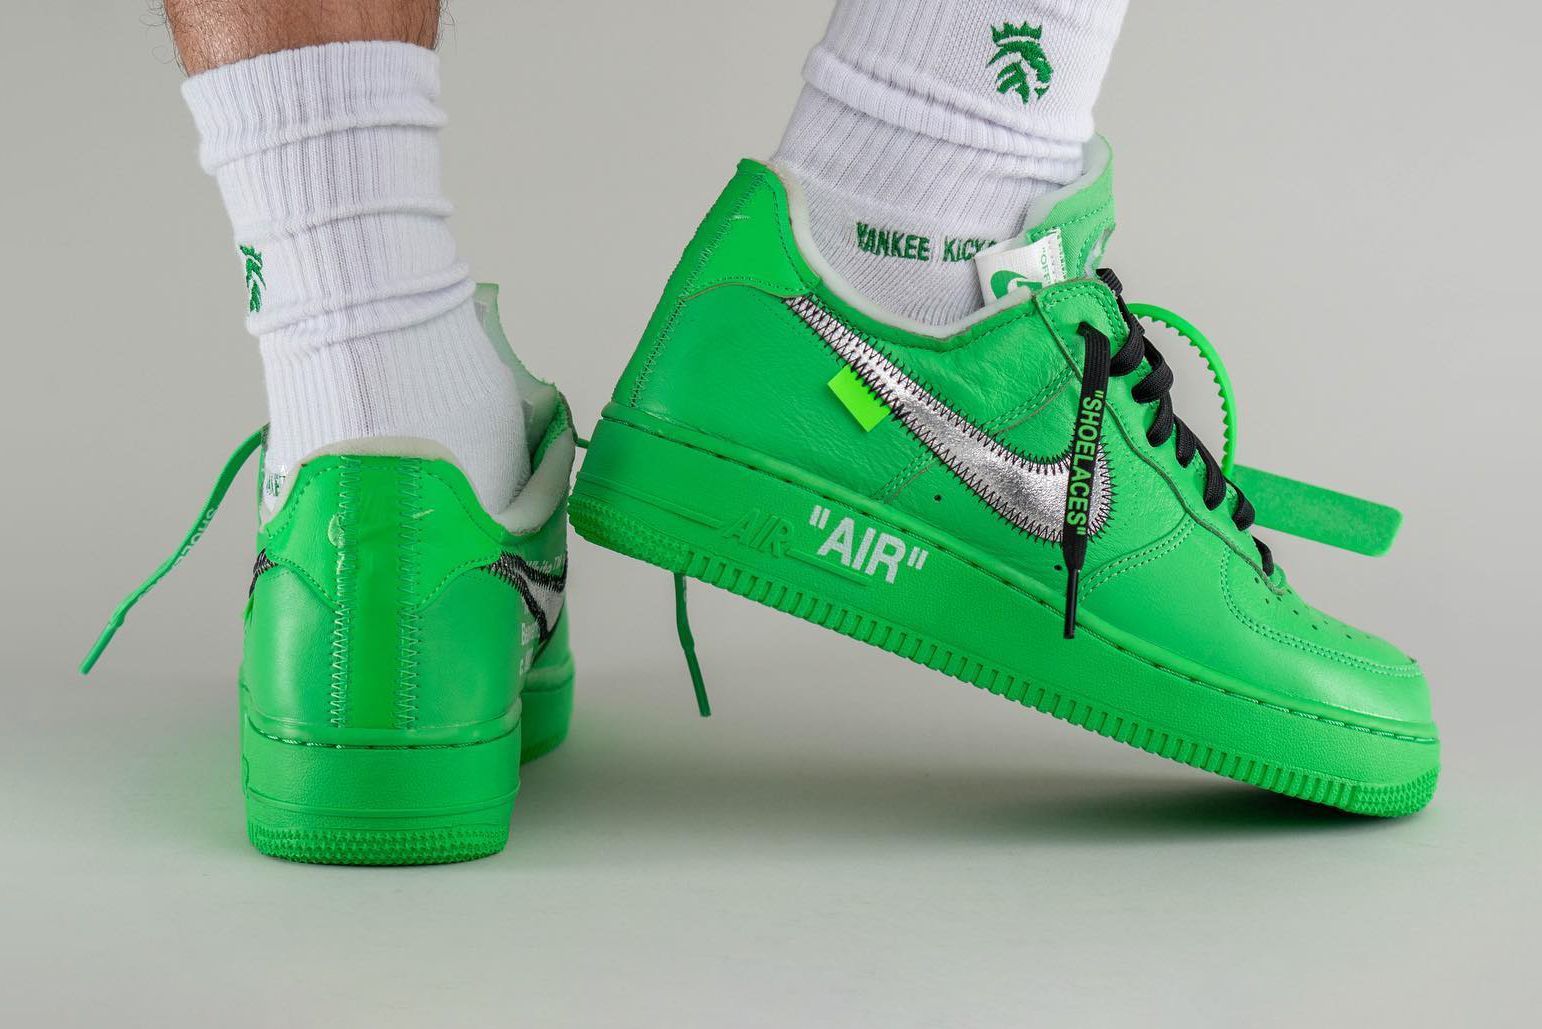 Nike off white Air Force 1 Low Brooklyn Light Green Spark